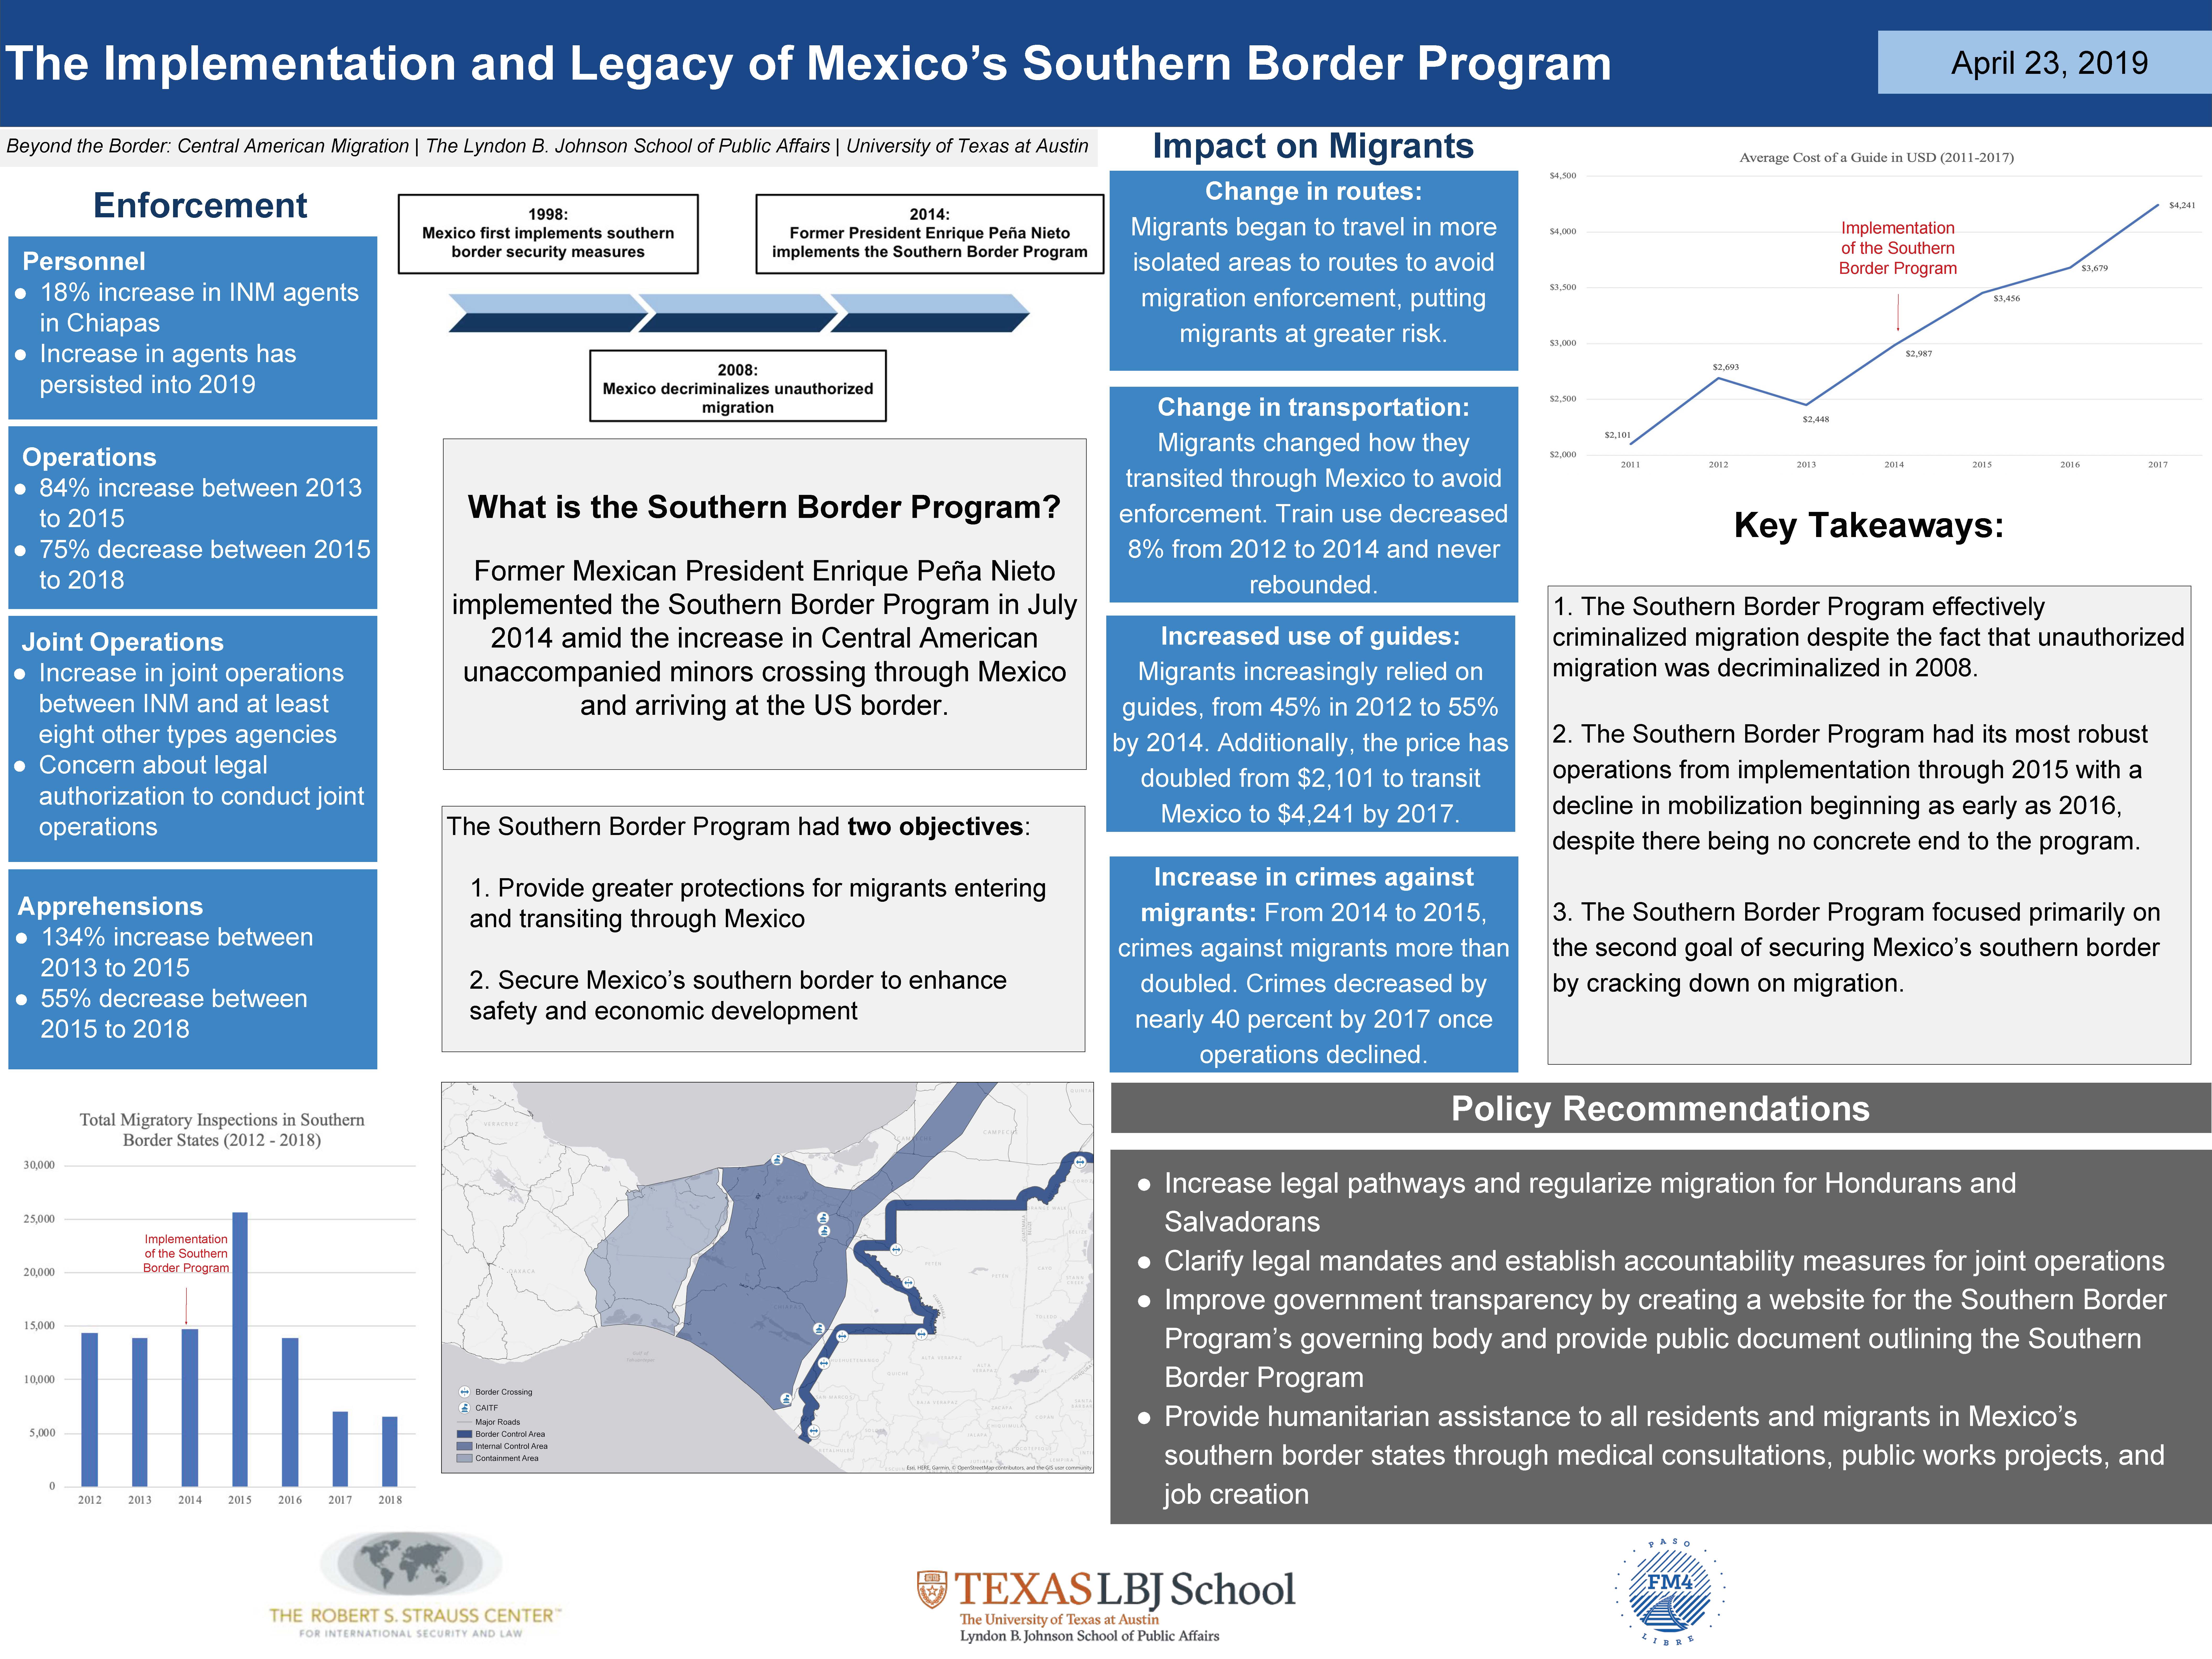 Innovation Bound 2019 research poster: The Implementation and Legacy of Mexico's Southern Border Program